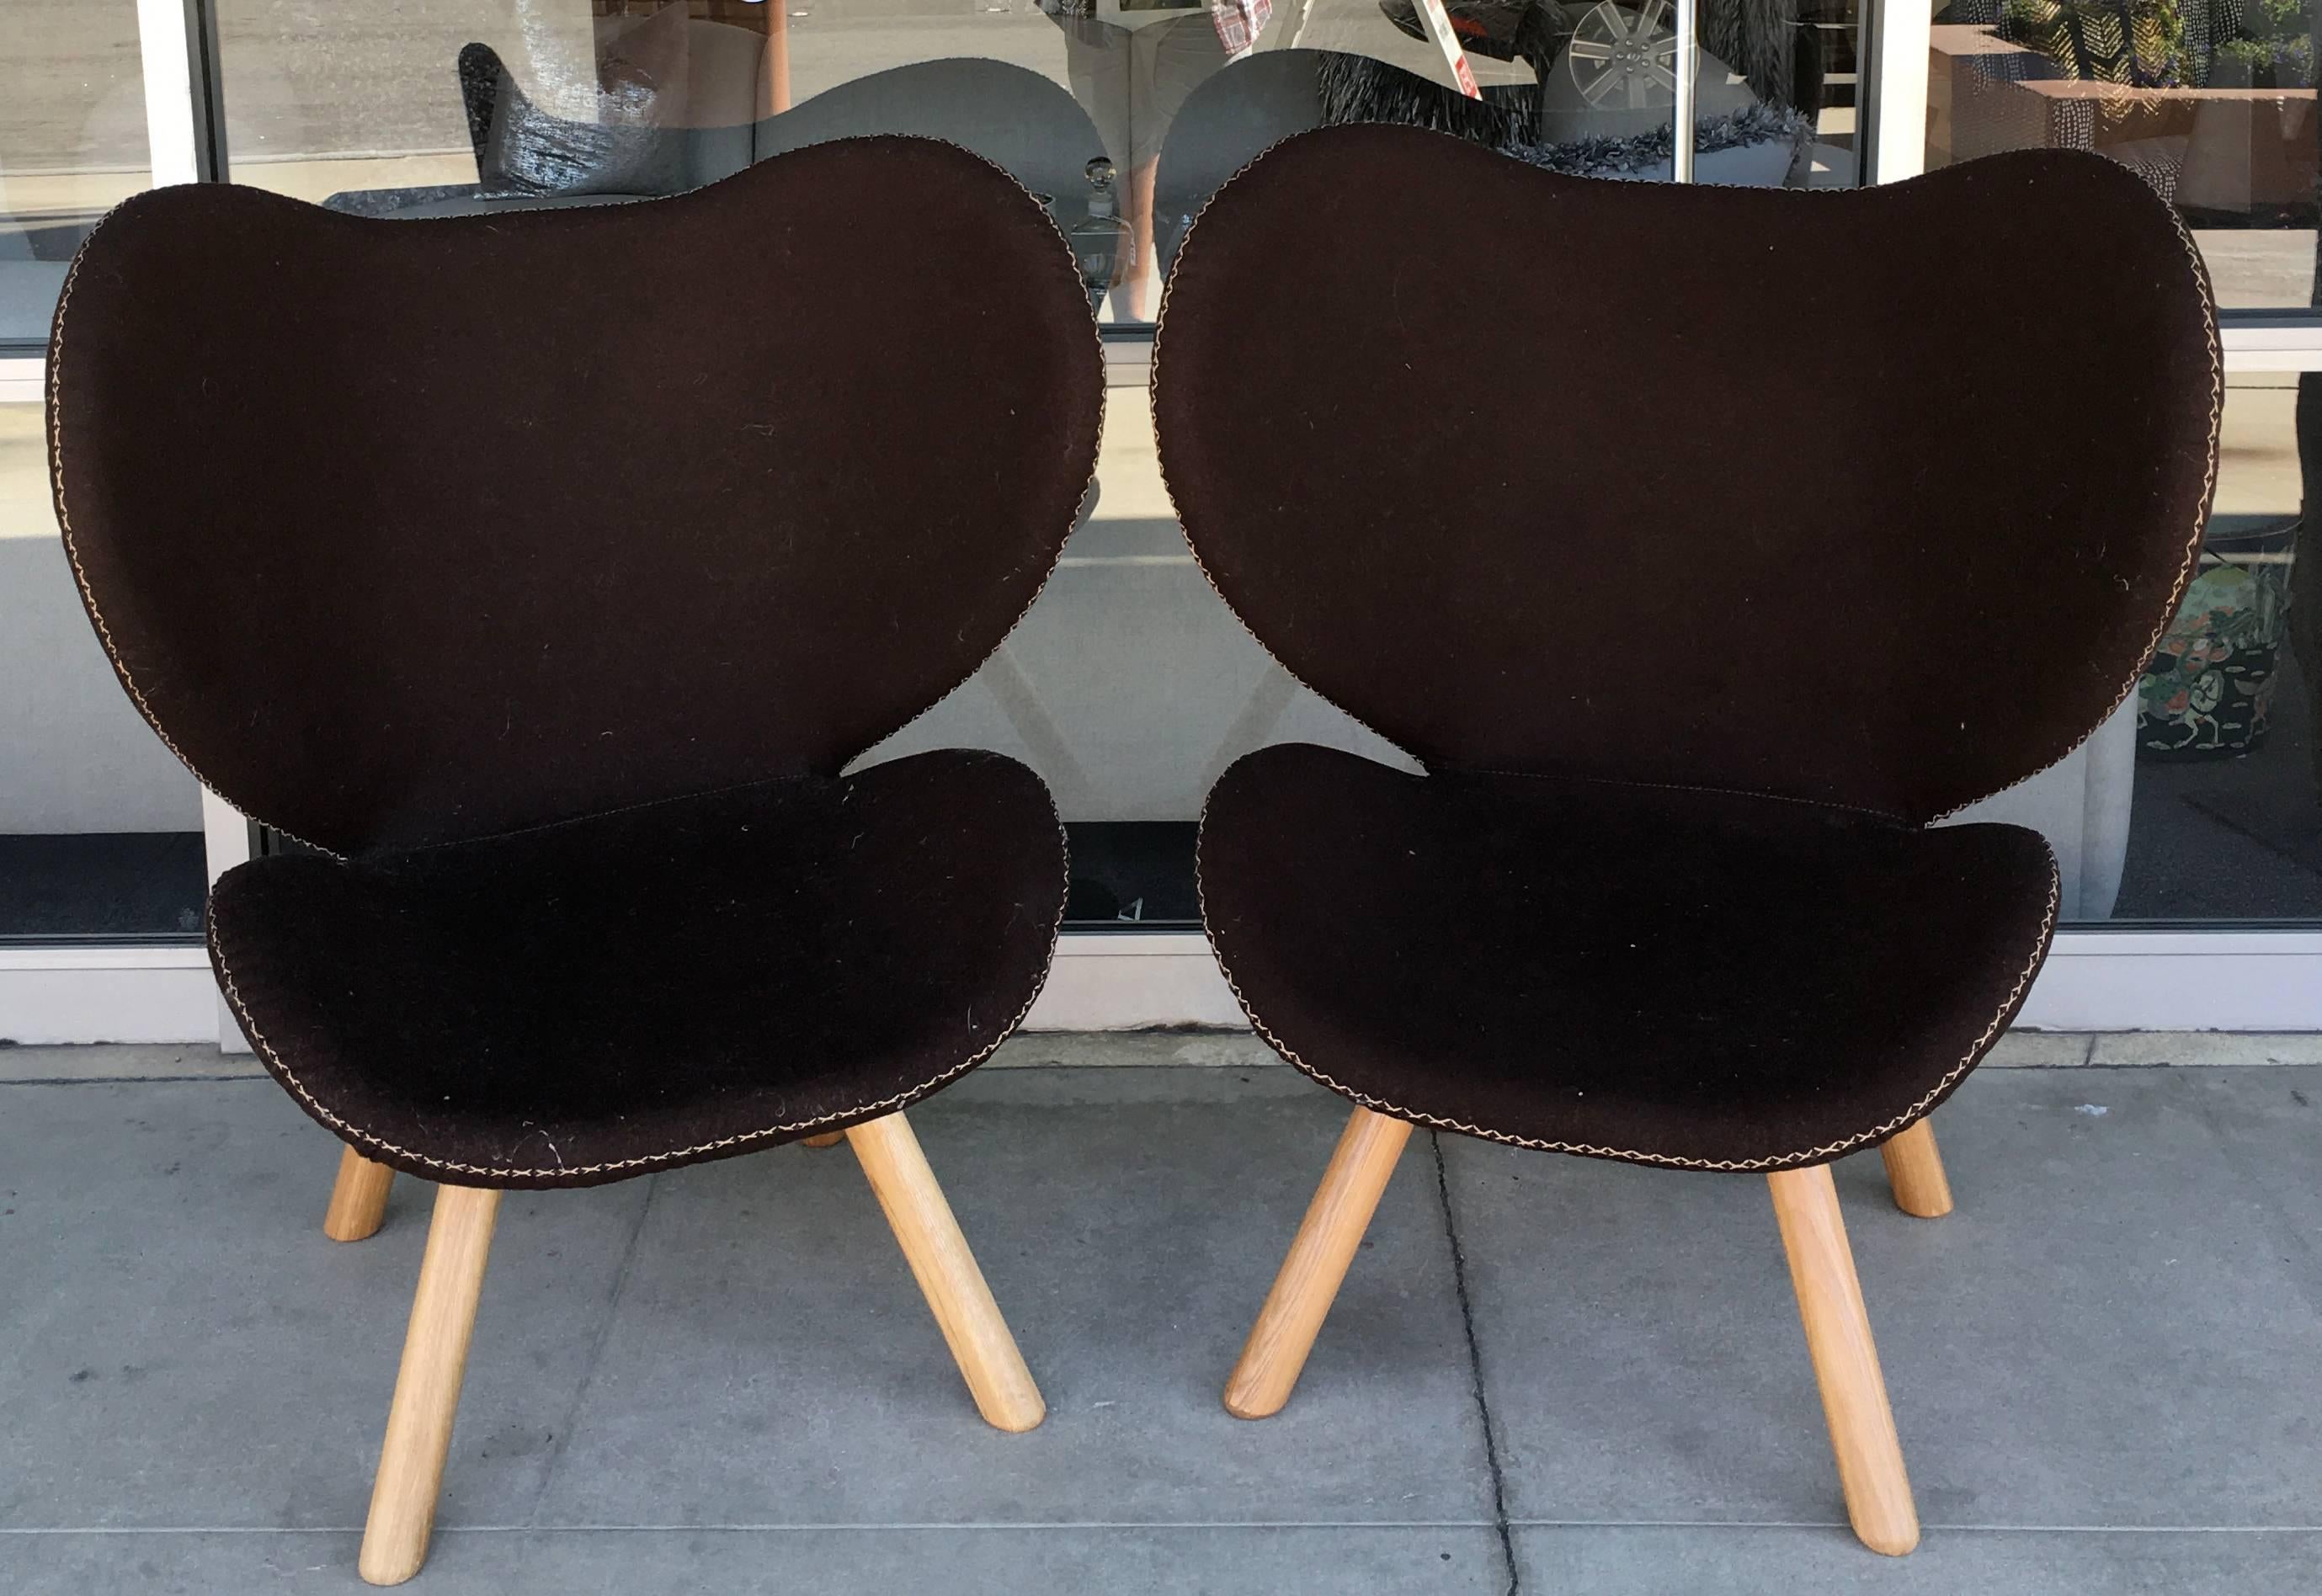 These chairs were Mid-Century designed in Denmark, but made recently on awesome dark brown wool with hand stitching detail. Great solid wood legs. The chairs have an amazing back design and look great from all angels. Danish design plaque on each